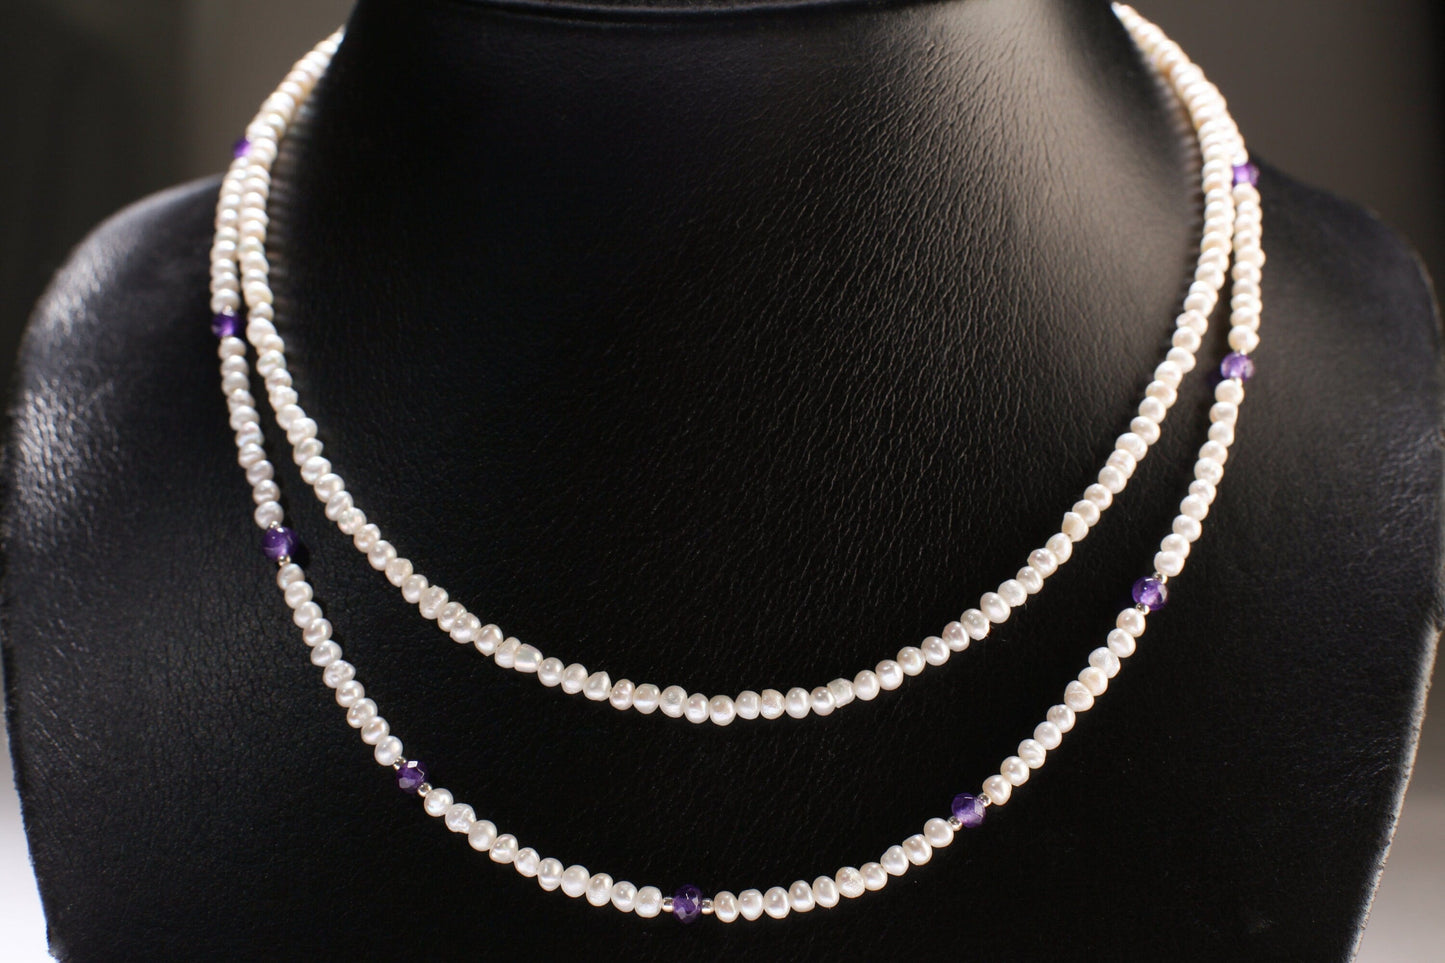 Freshwater 3-3.5mm Seed Pearl, 925 Sterling Silver Necklace, Choice of Pearl Only or with Genuine Amethyst Spacer, Holiday Gift